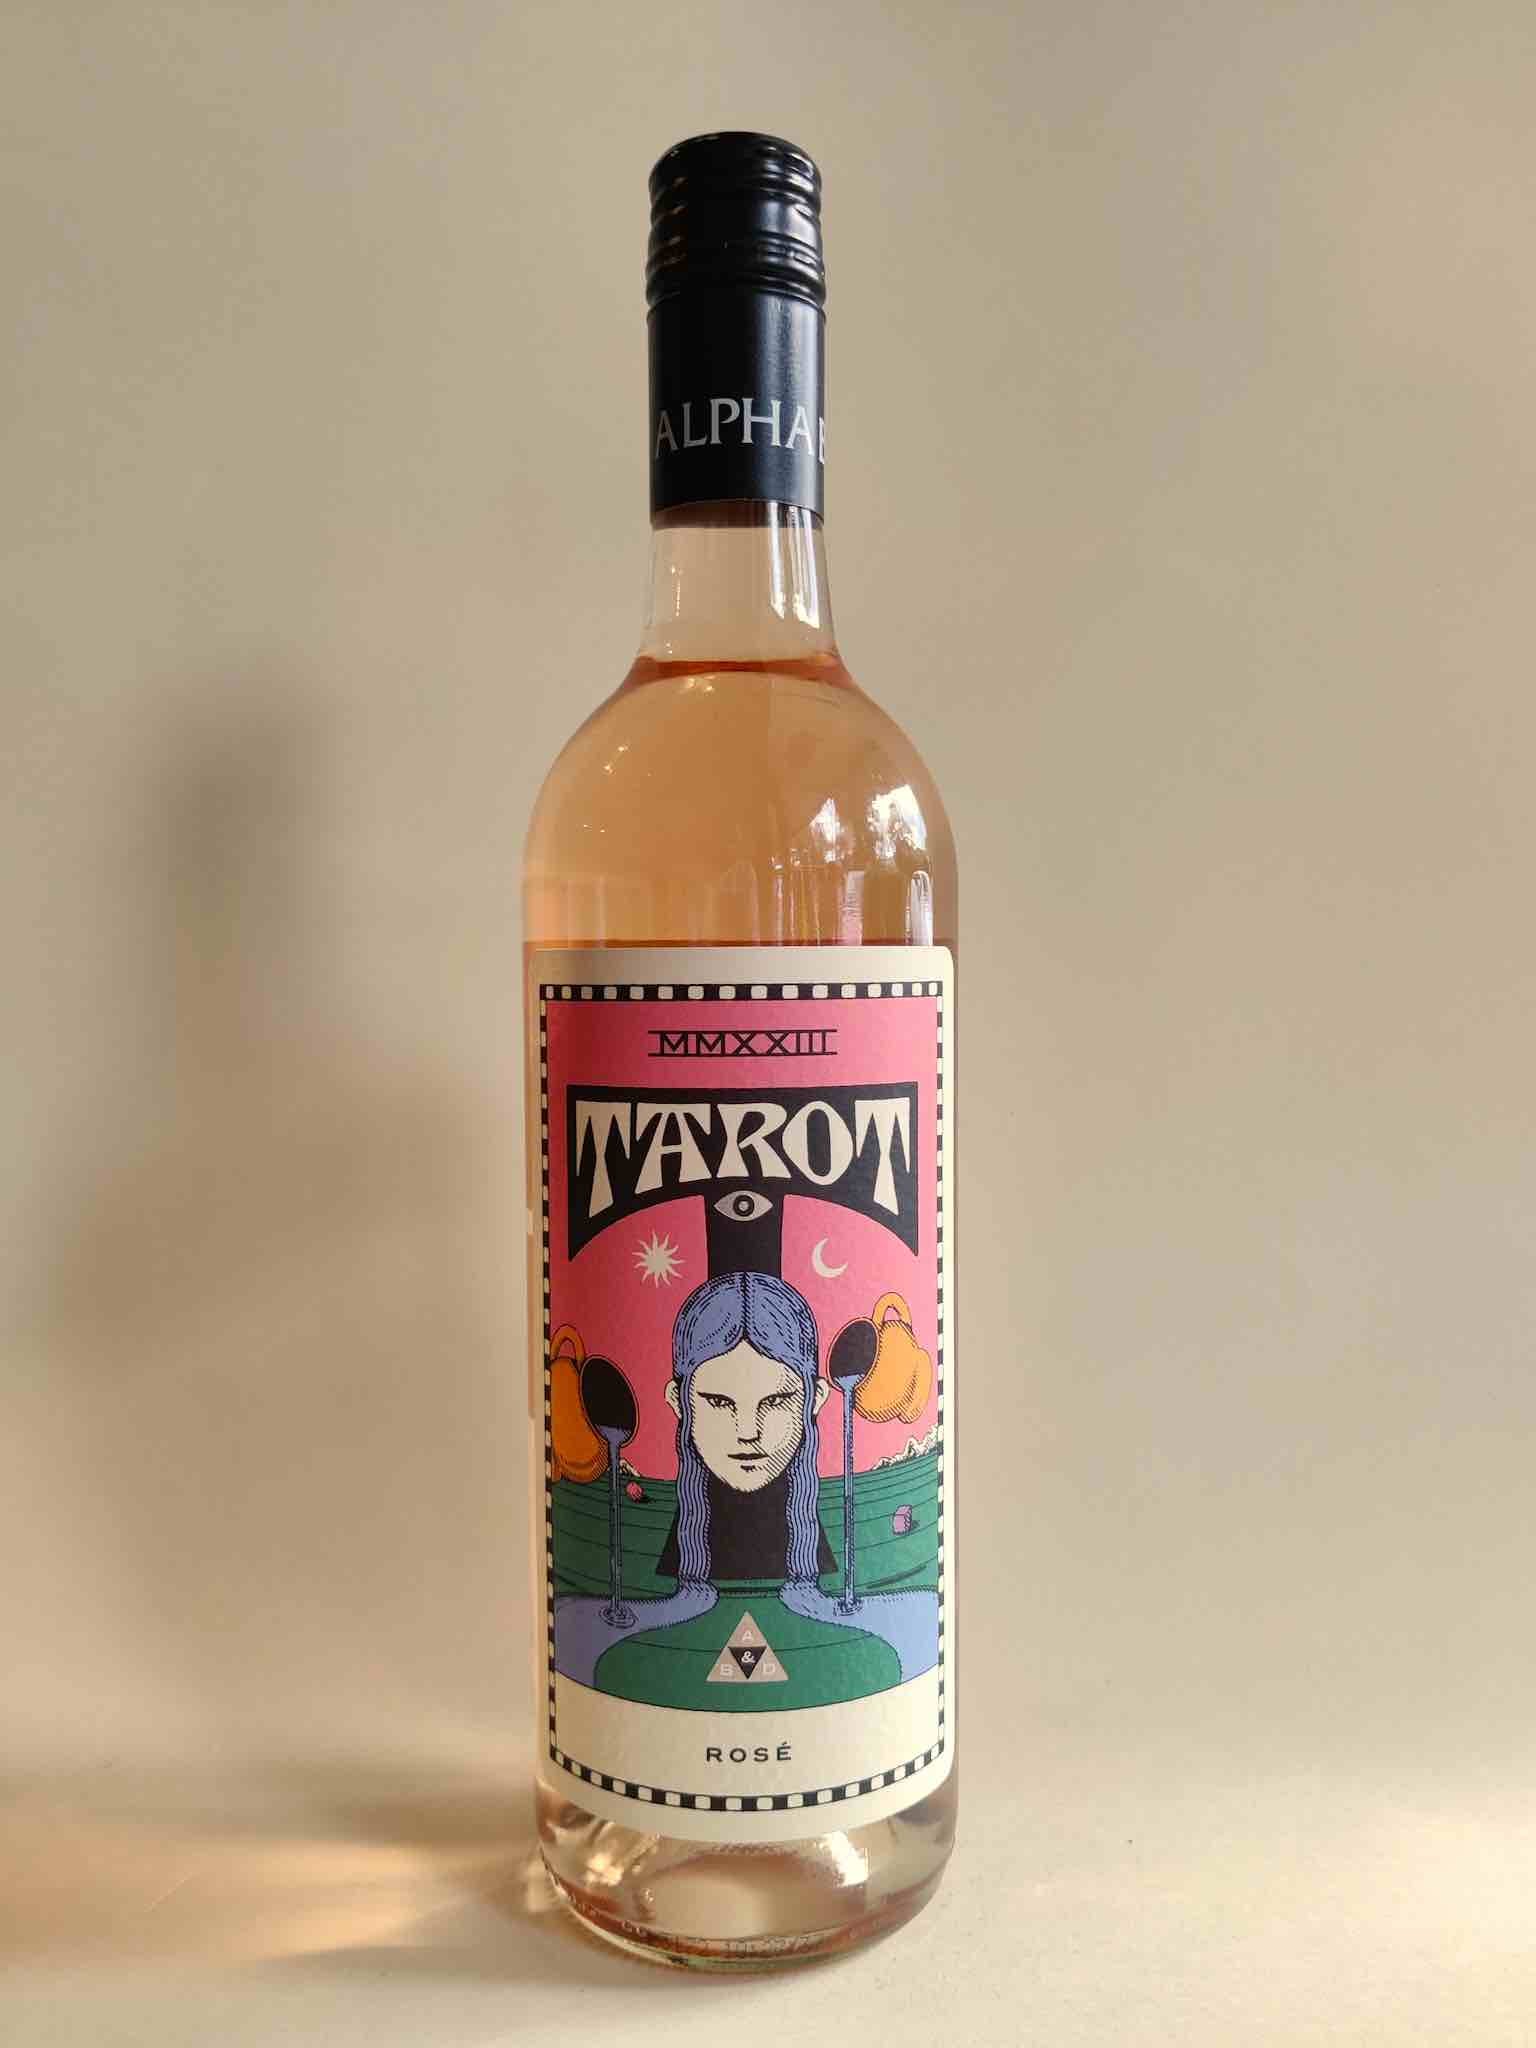 A bottle of Alpha Box and Dice Tarot Rosé from McLaren Vale, South Australia.